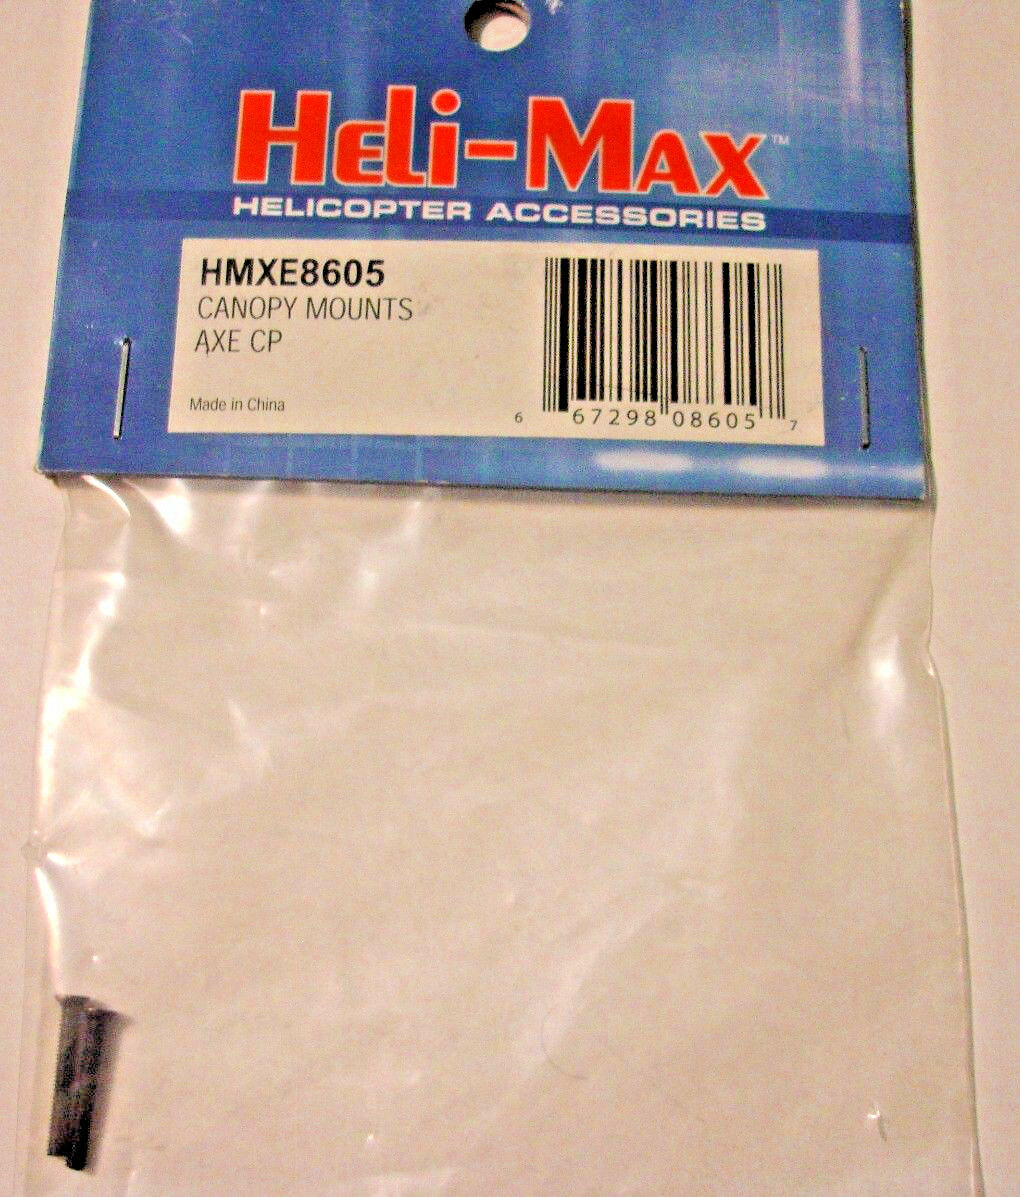 Heli-max Canopy Mounts Hmxe8605 Axe Cp Helicopter Rc Part